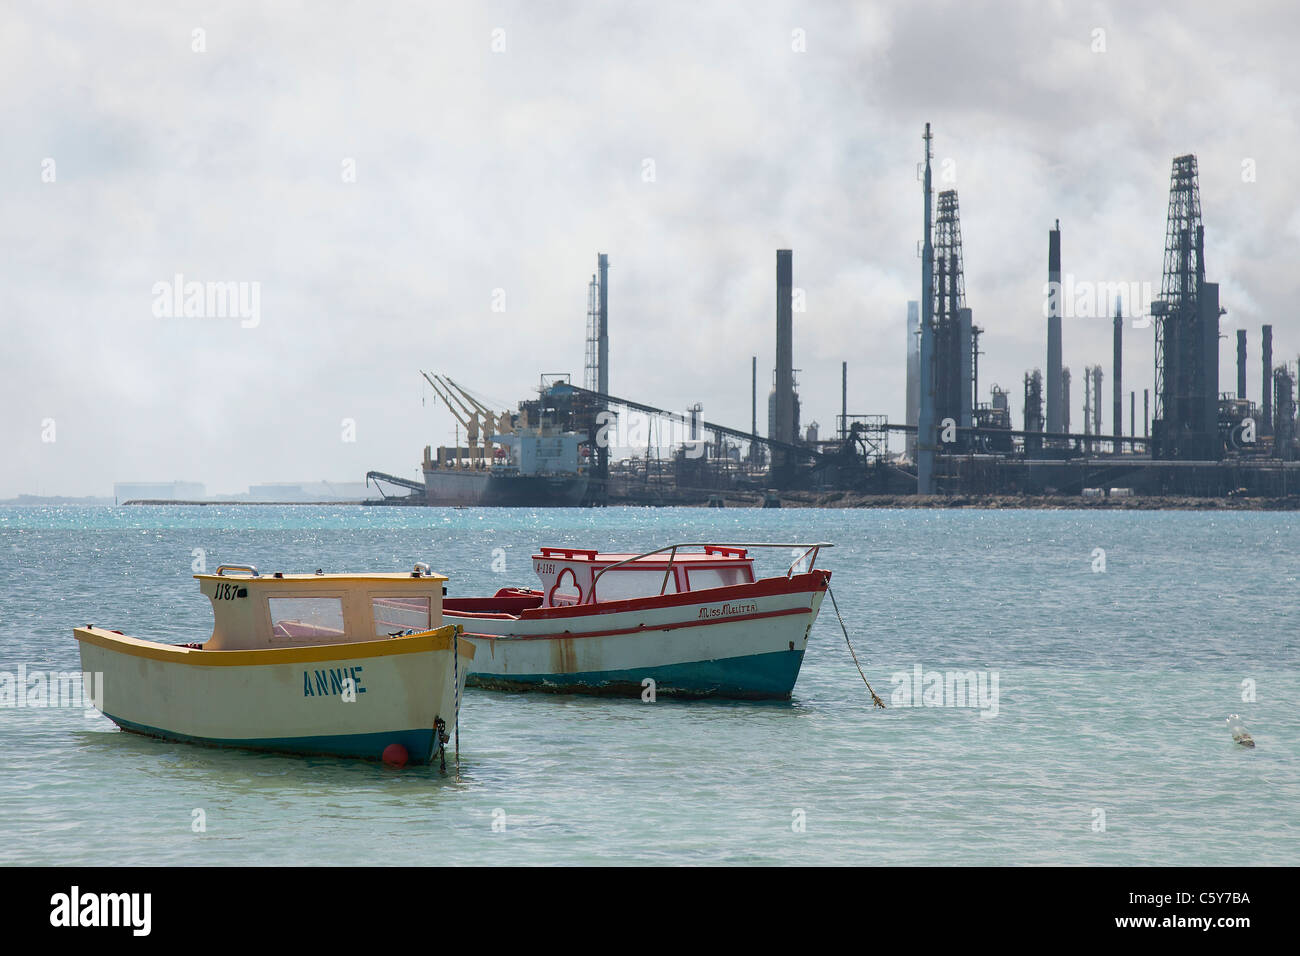 Fishing boats in a bay with the Valero Oil Refinery in the background, Aruba, Dutch Caribbean Stock Photo